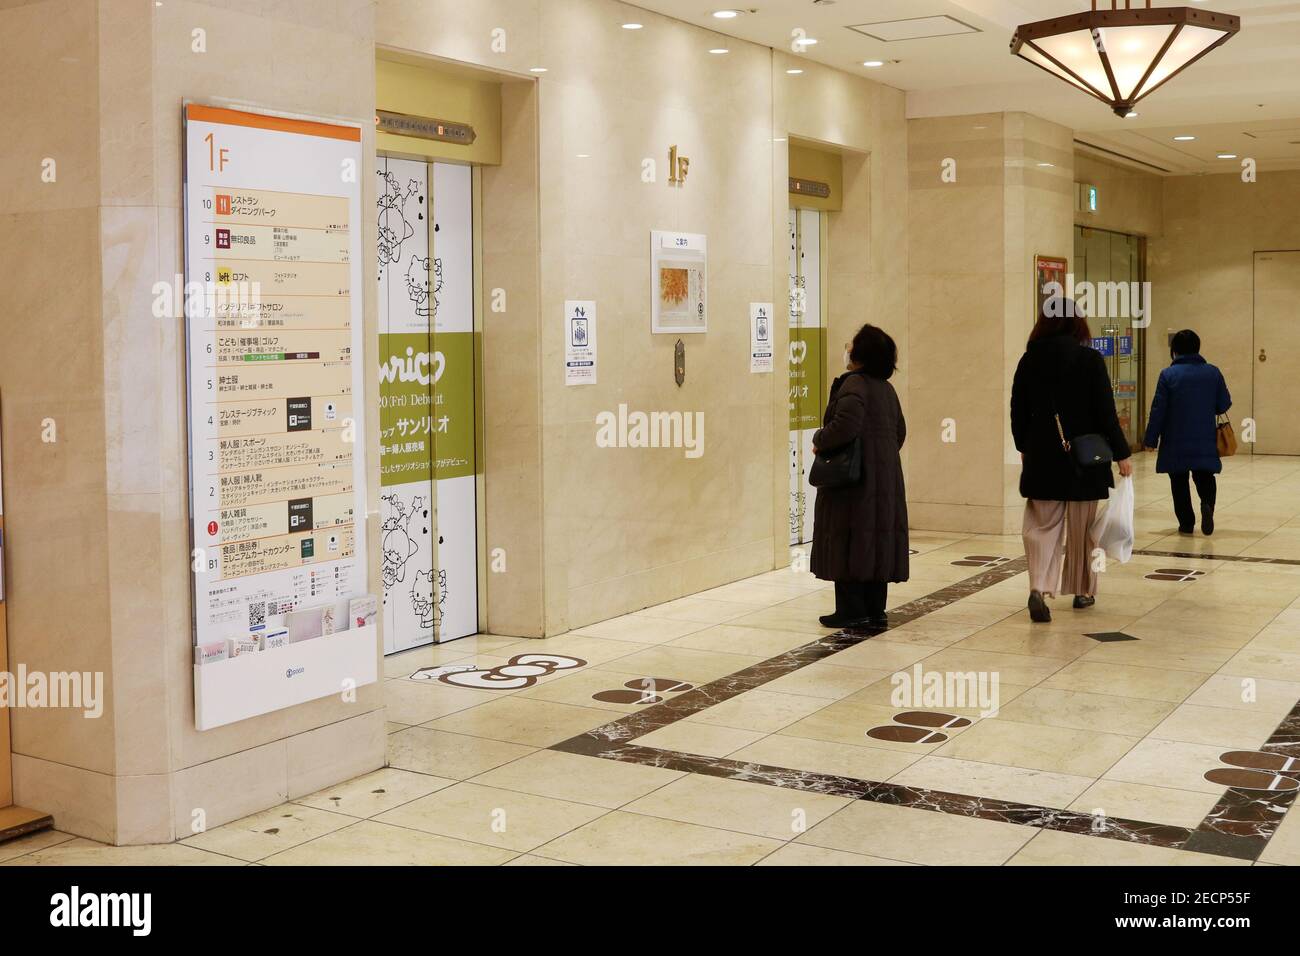 Chiba City Sogo department store elevators with advert for a Sanrio shop. During coronavirus outbreak there are social distancing markers. (1/2021) Stock Photo